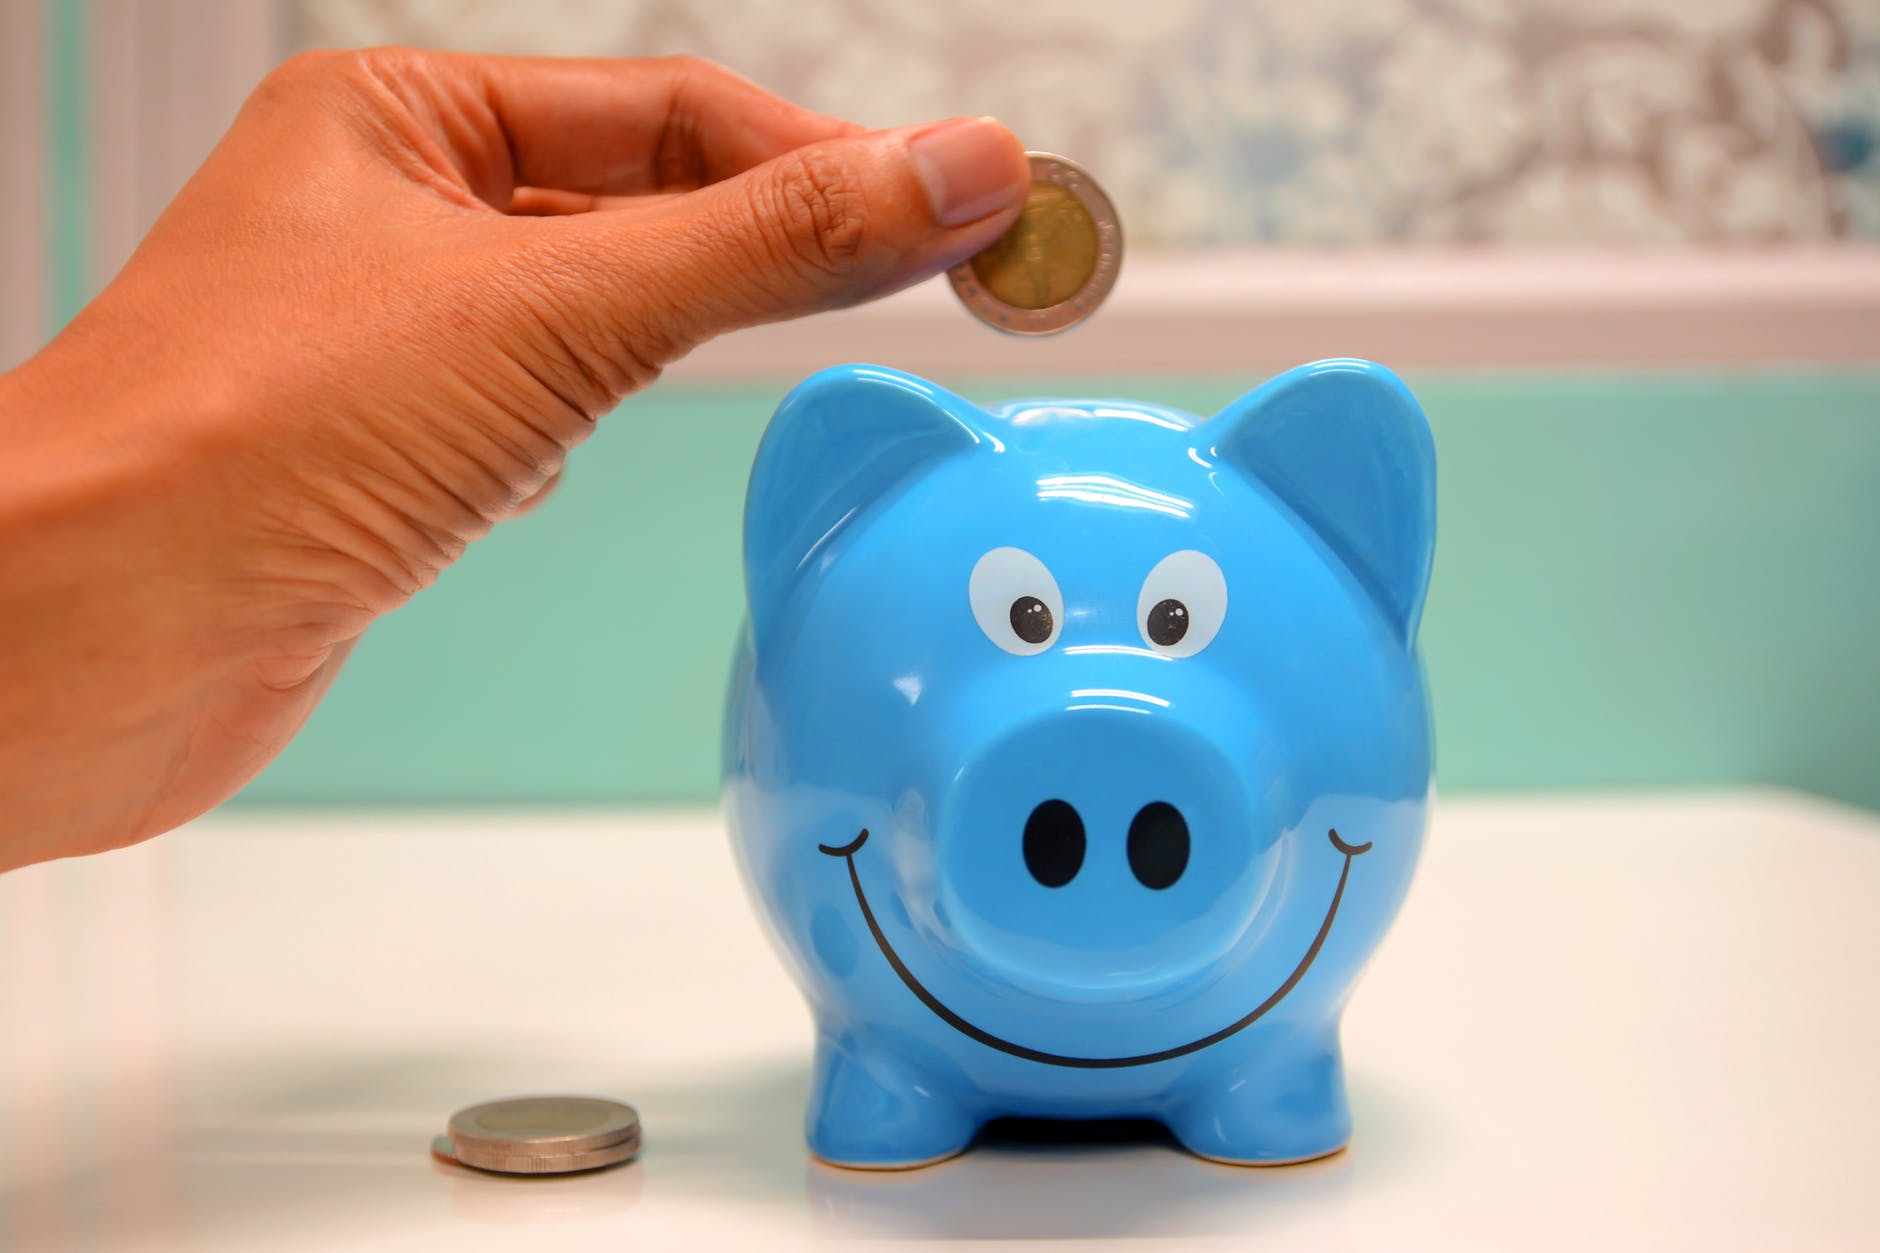 Ways to save money on a tight budget